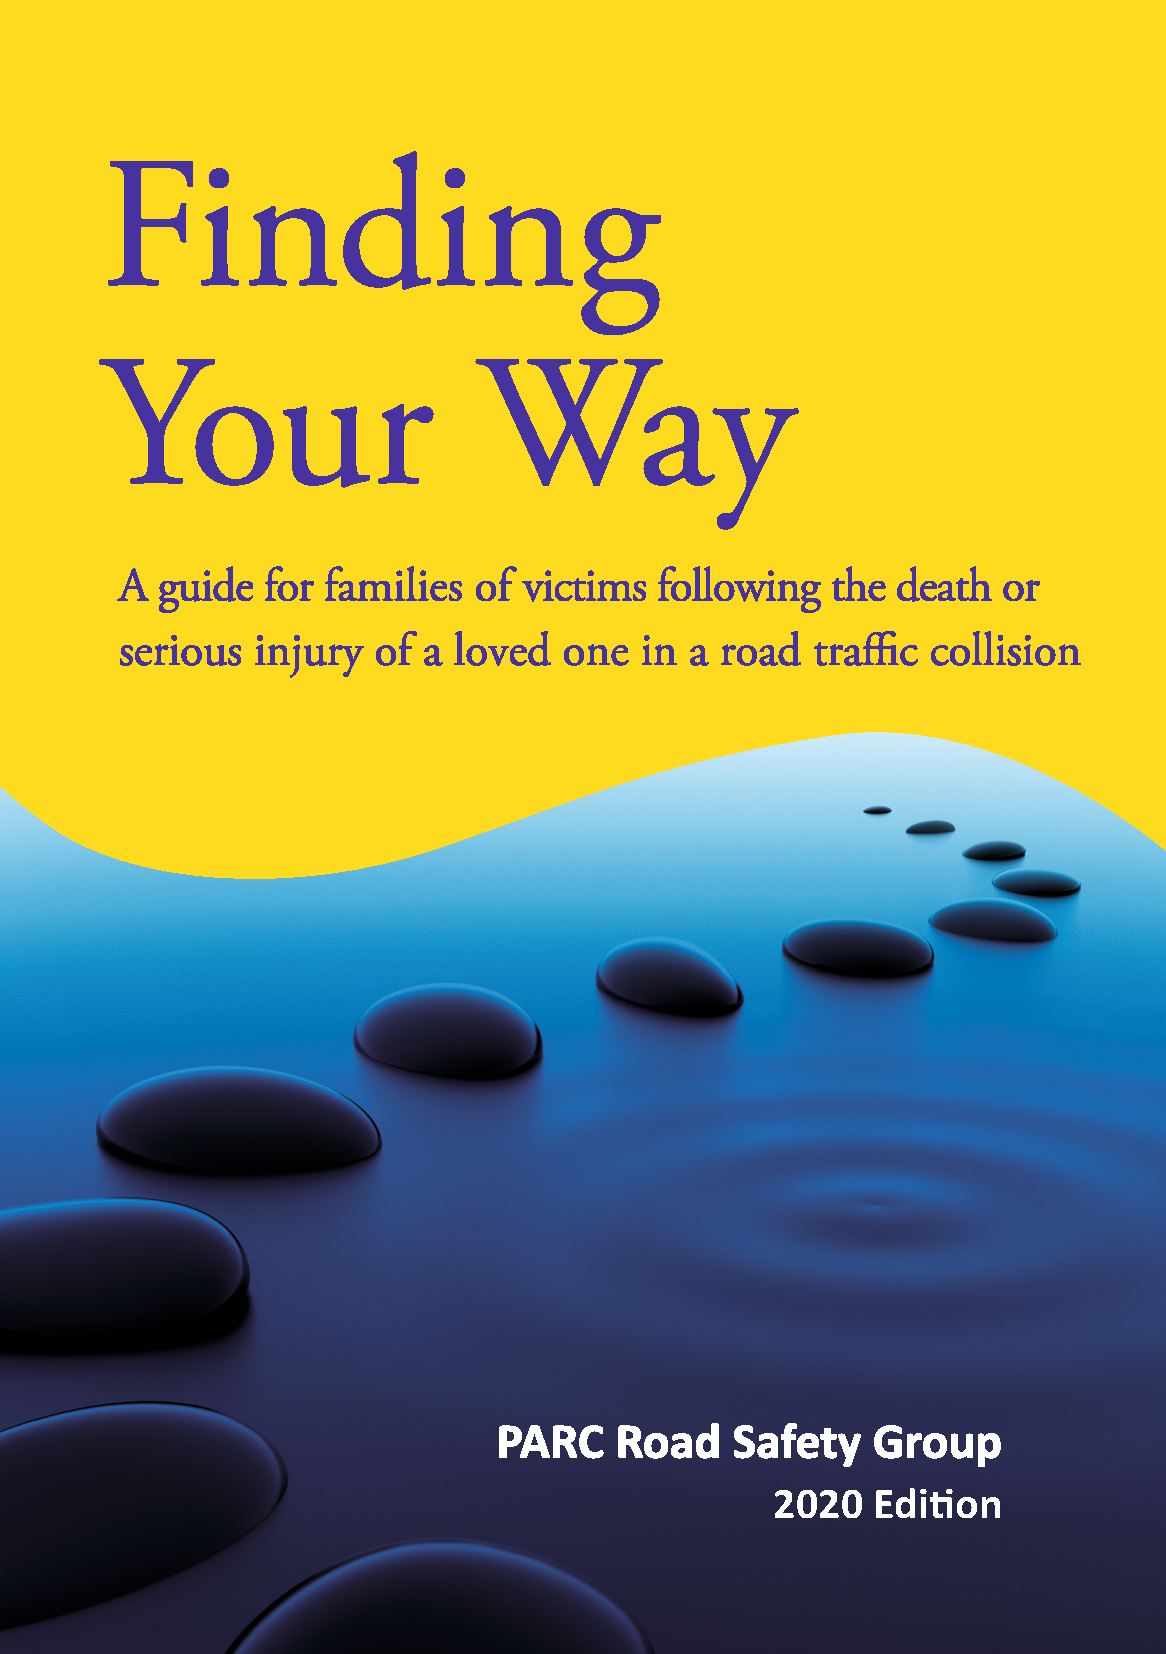 Finding Your Way A Guide for Families of Victims of Road Traffic Collisions